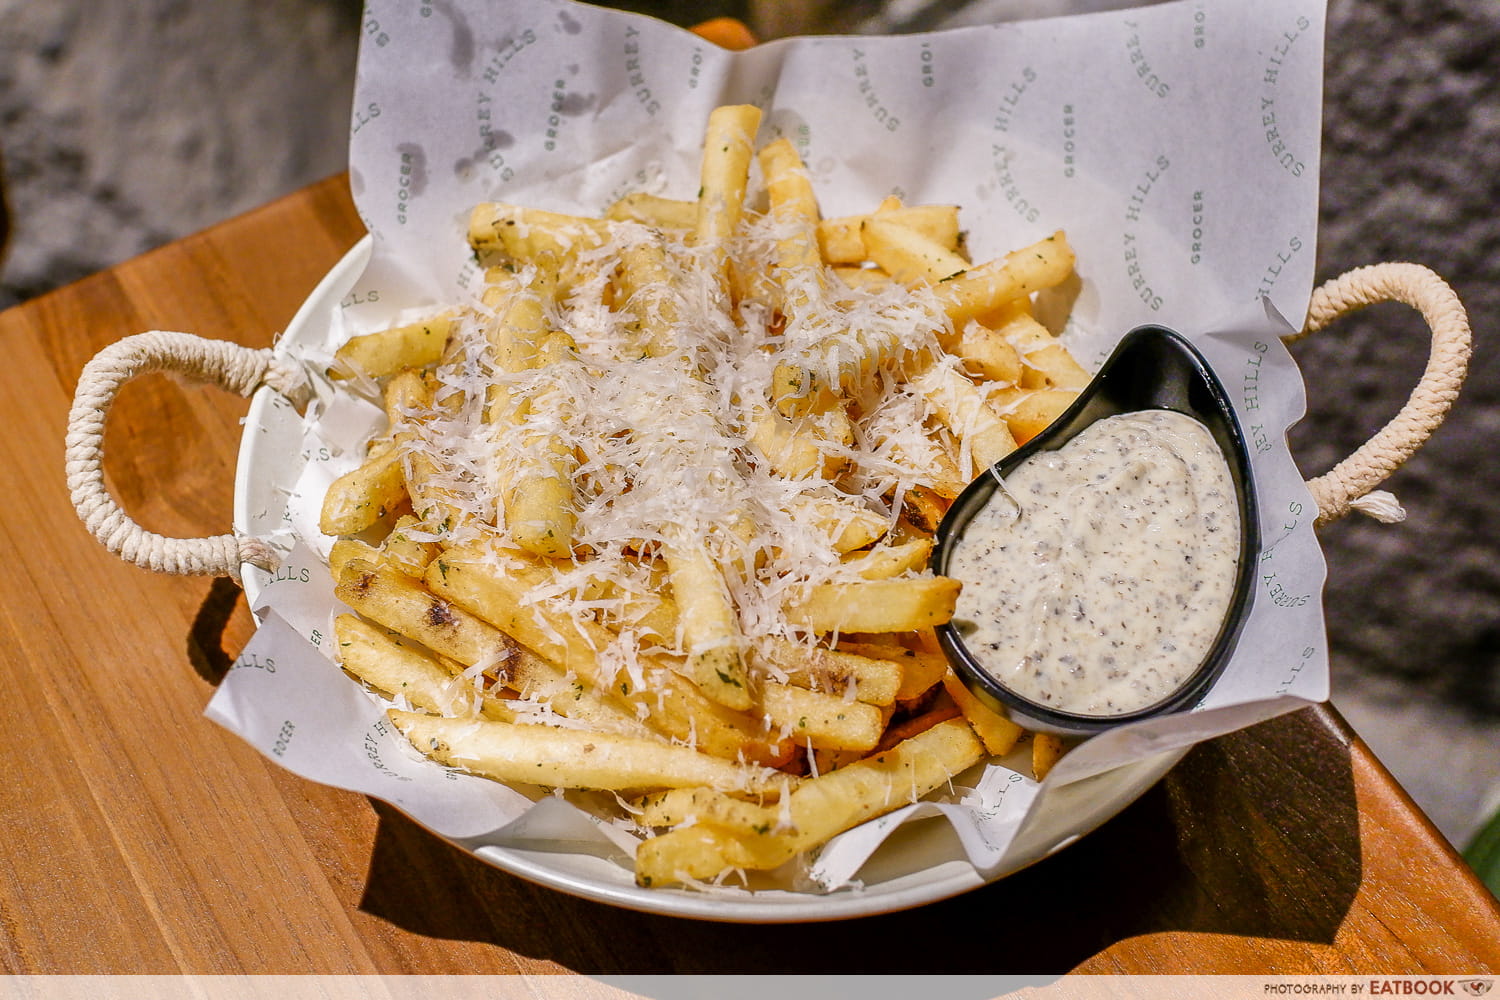 surrey hills grocer ion truffle fries